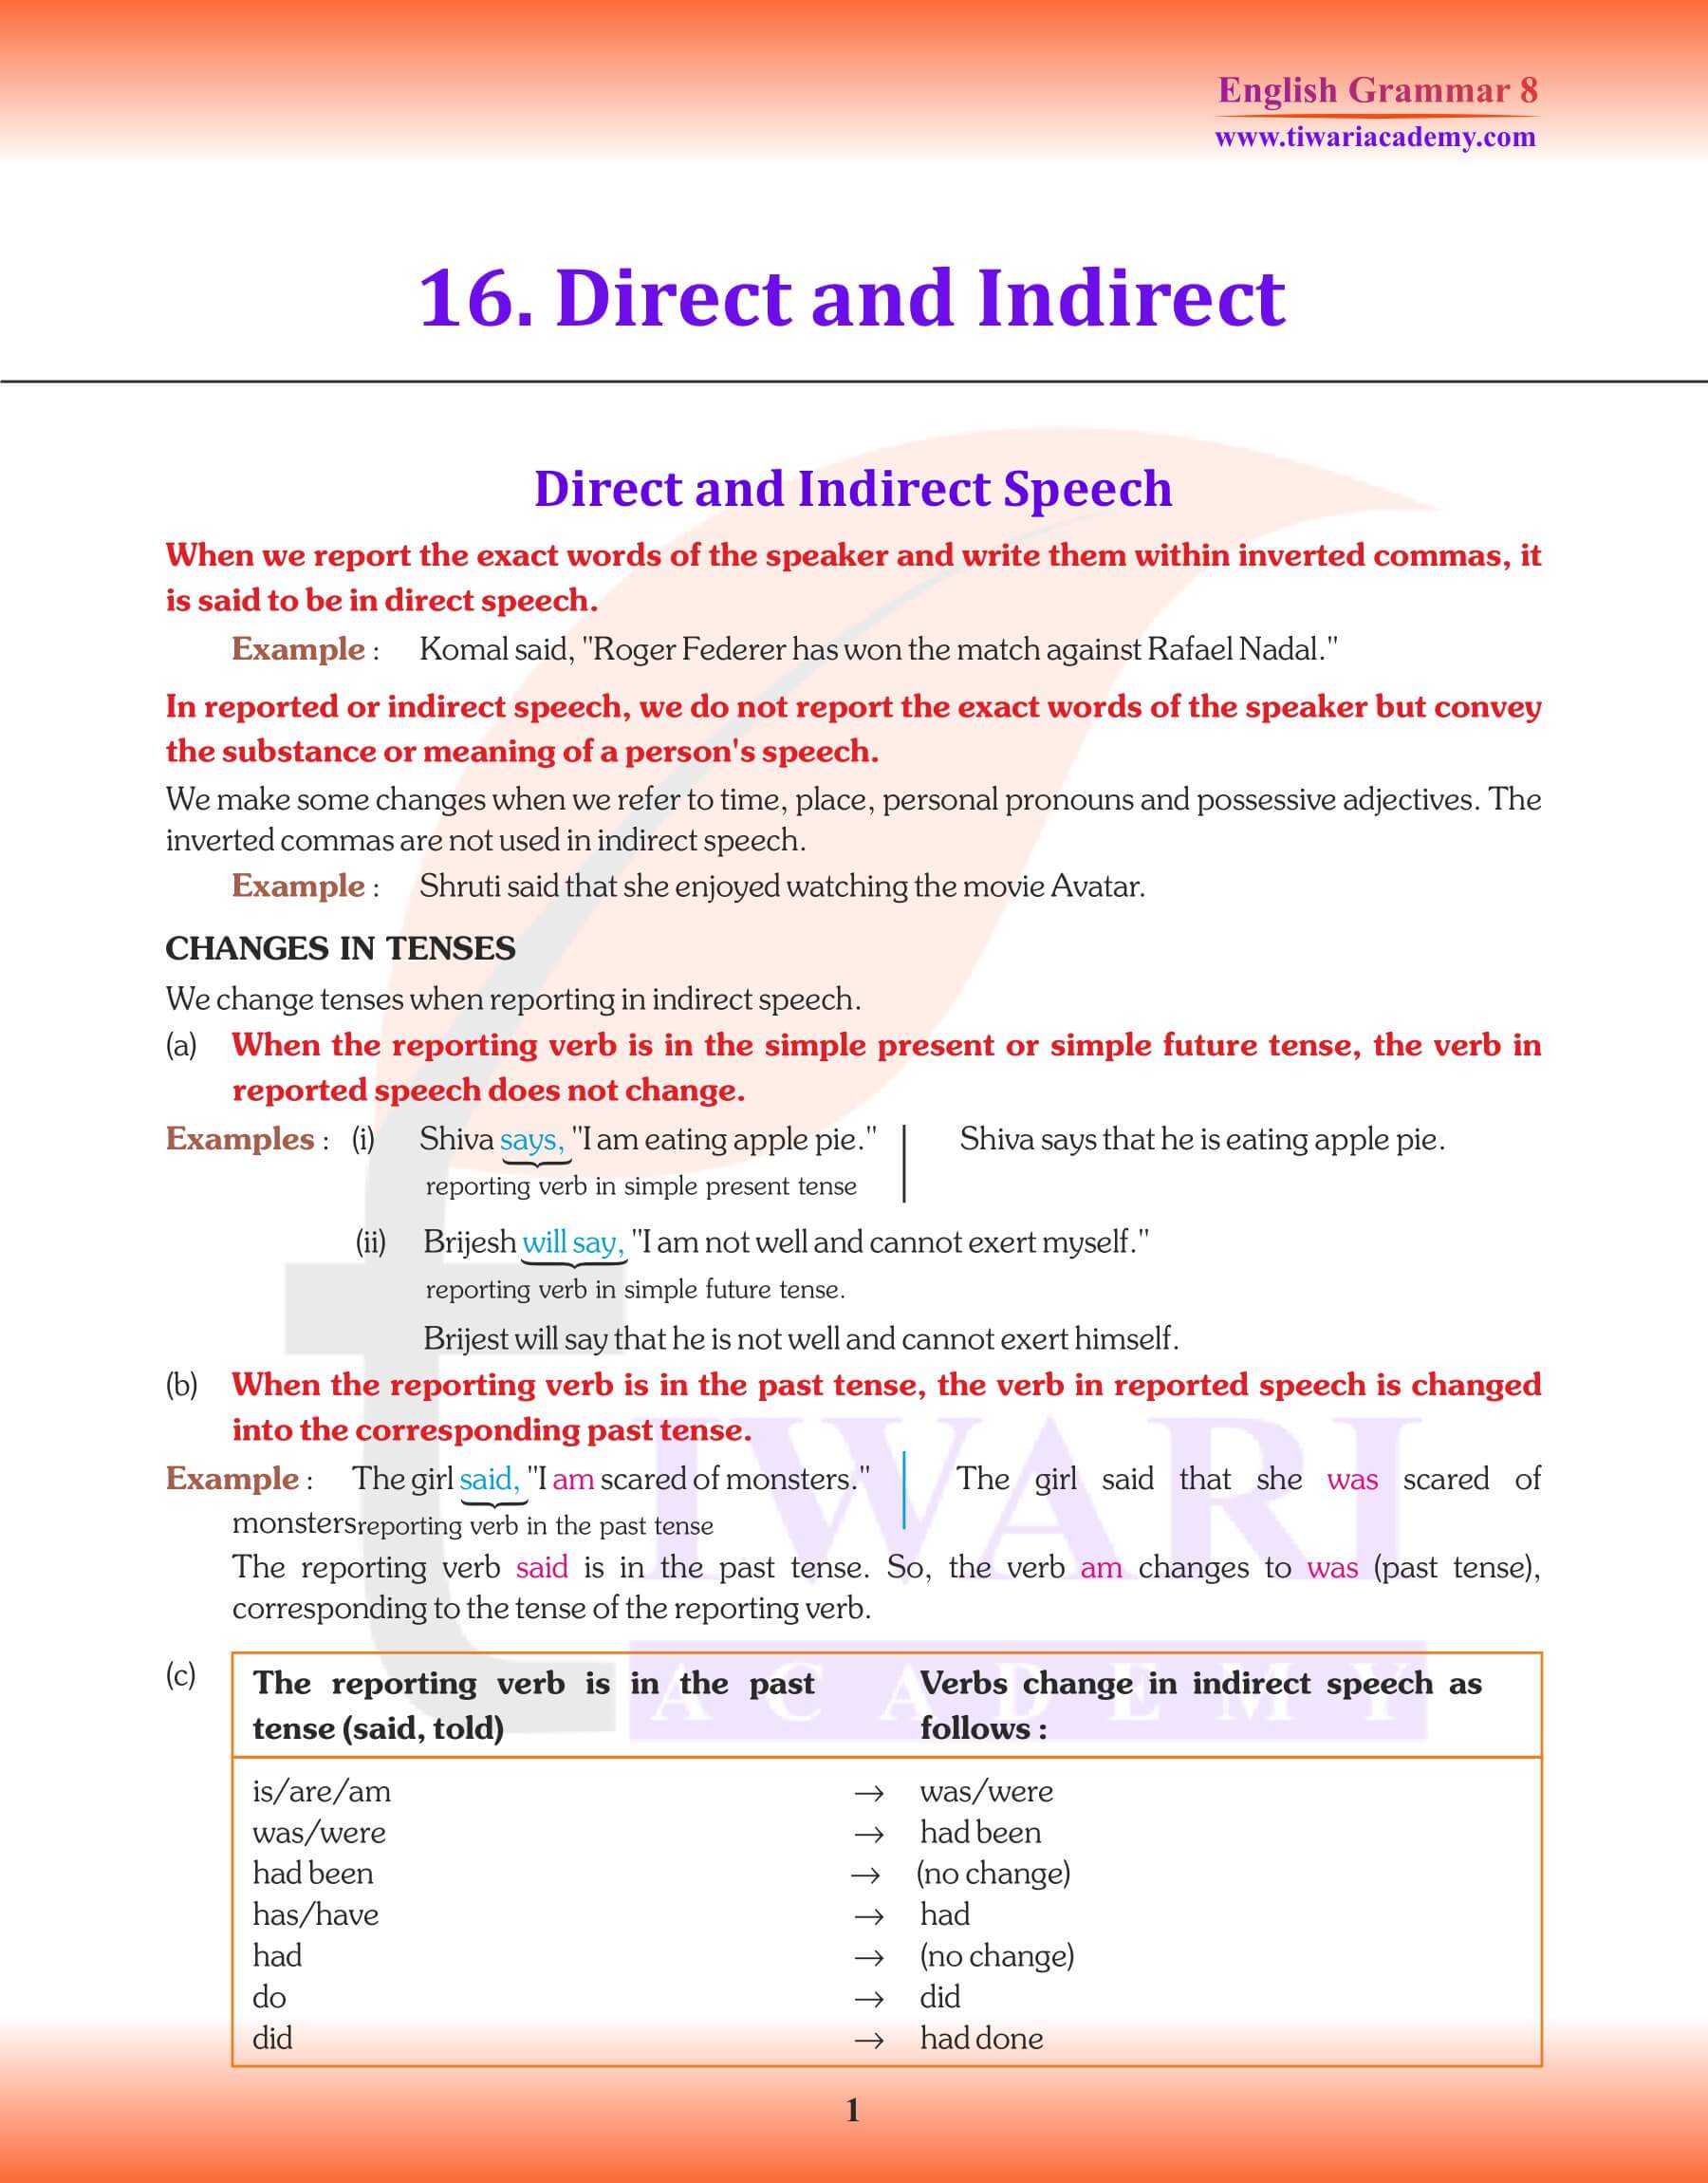 Class 8 English Grammar Chapter 16 Direct and Indirect Speech Revision Book